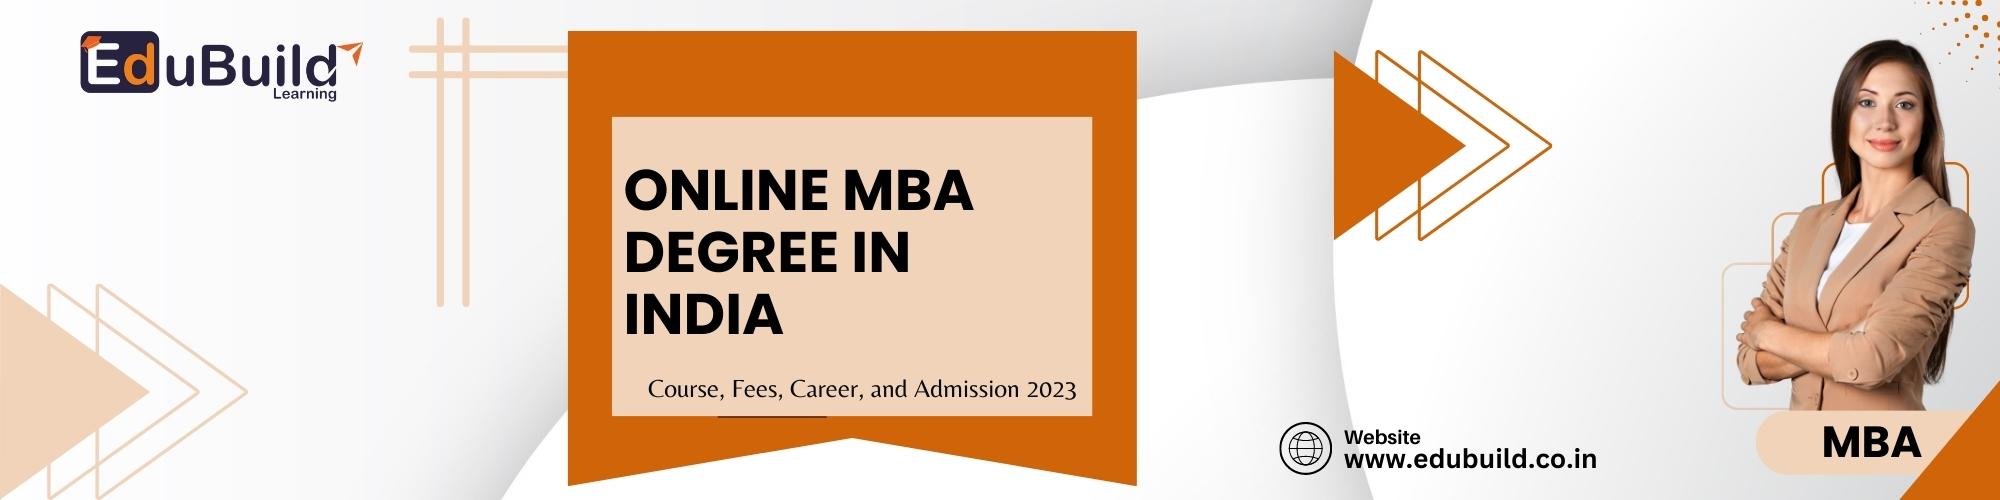 Online MBA Degree in India: Course, Fees, Career, and Admission 2023